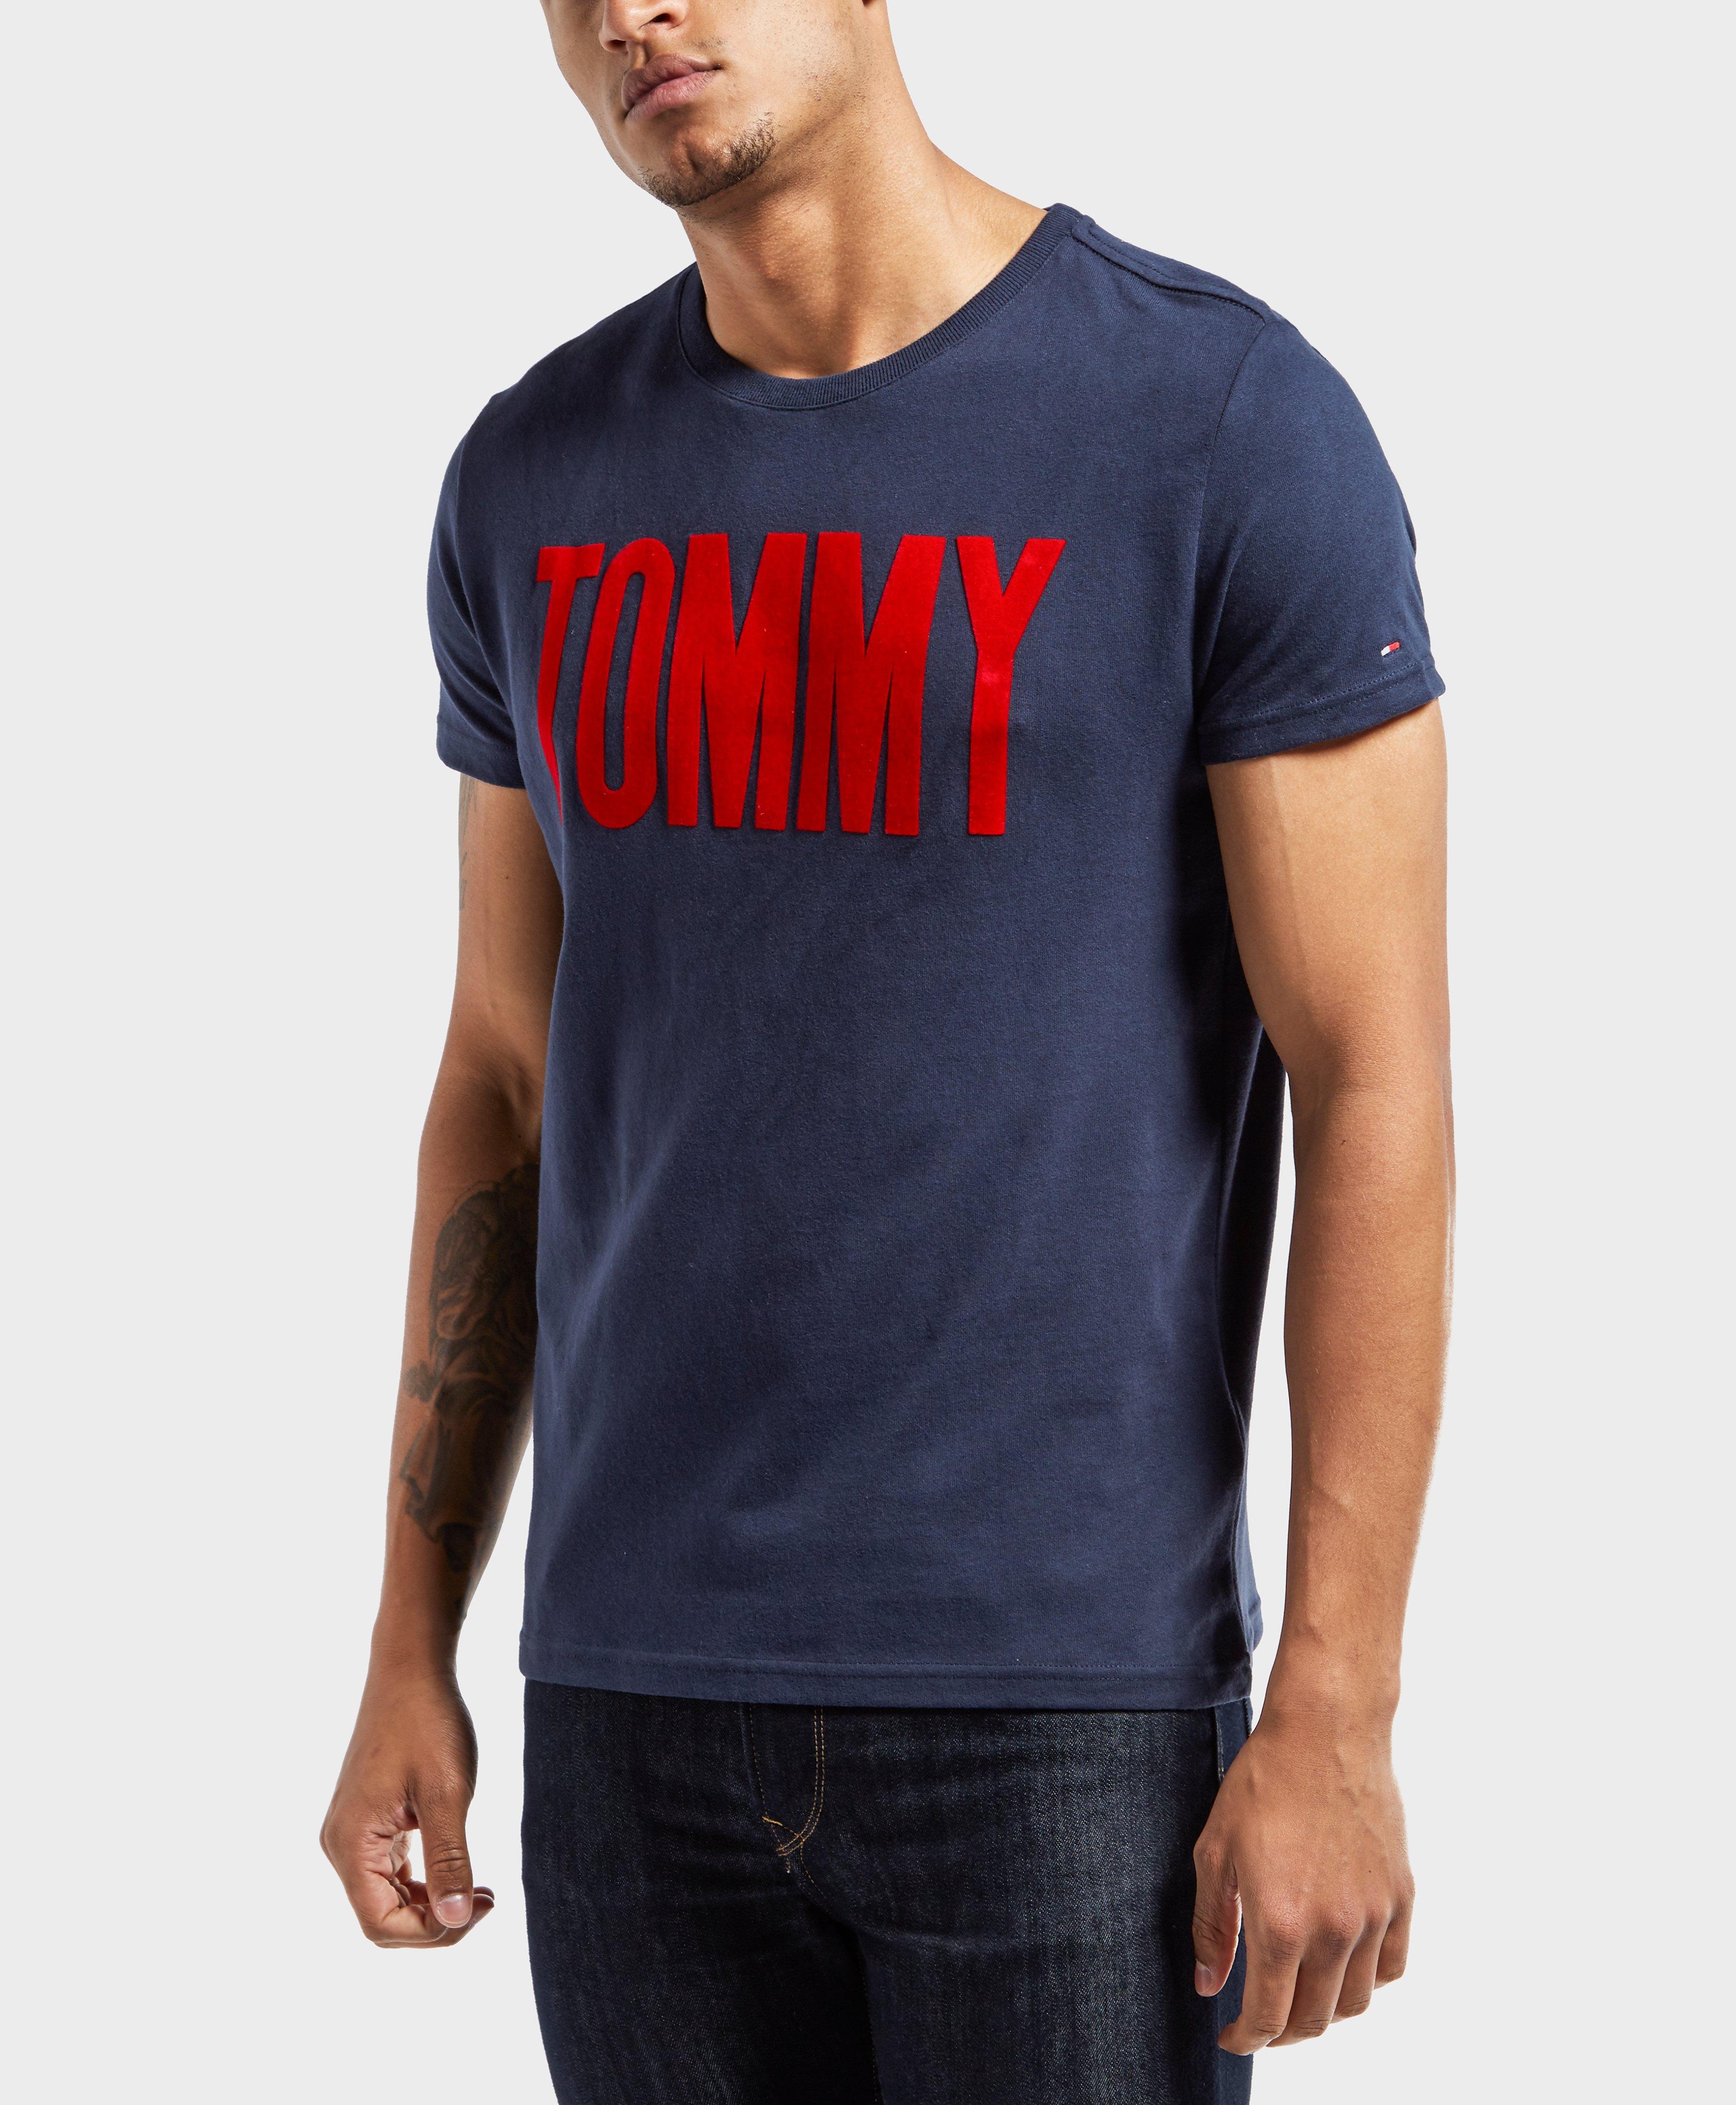 Decor online tommy hilfiger t shirt price in usa zumba stores